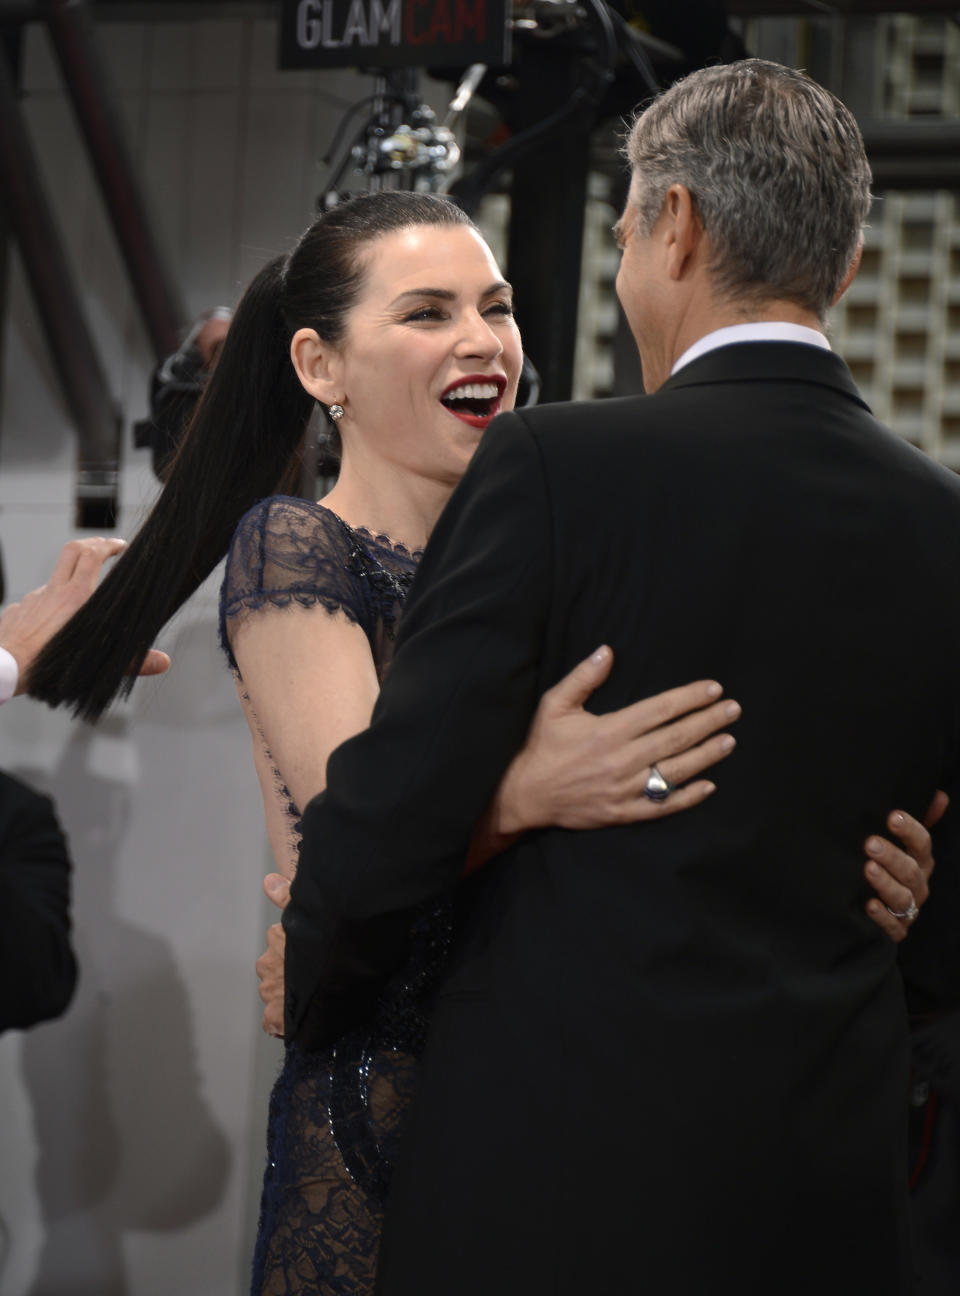 <p>Actors Julianna Margulies and George Clooney , who worked together on "E.R." had a little reunion at the 70th Annual Golden Globe Awards on January 13, 2013. Adorable.&nbsp;</p>